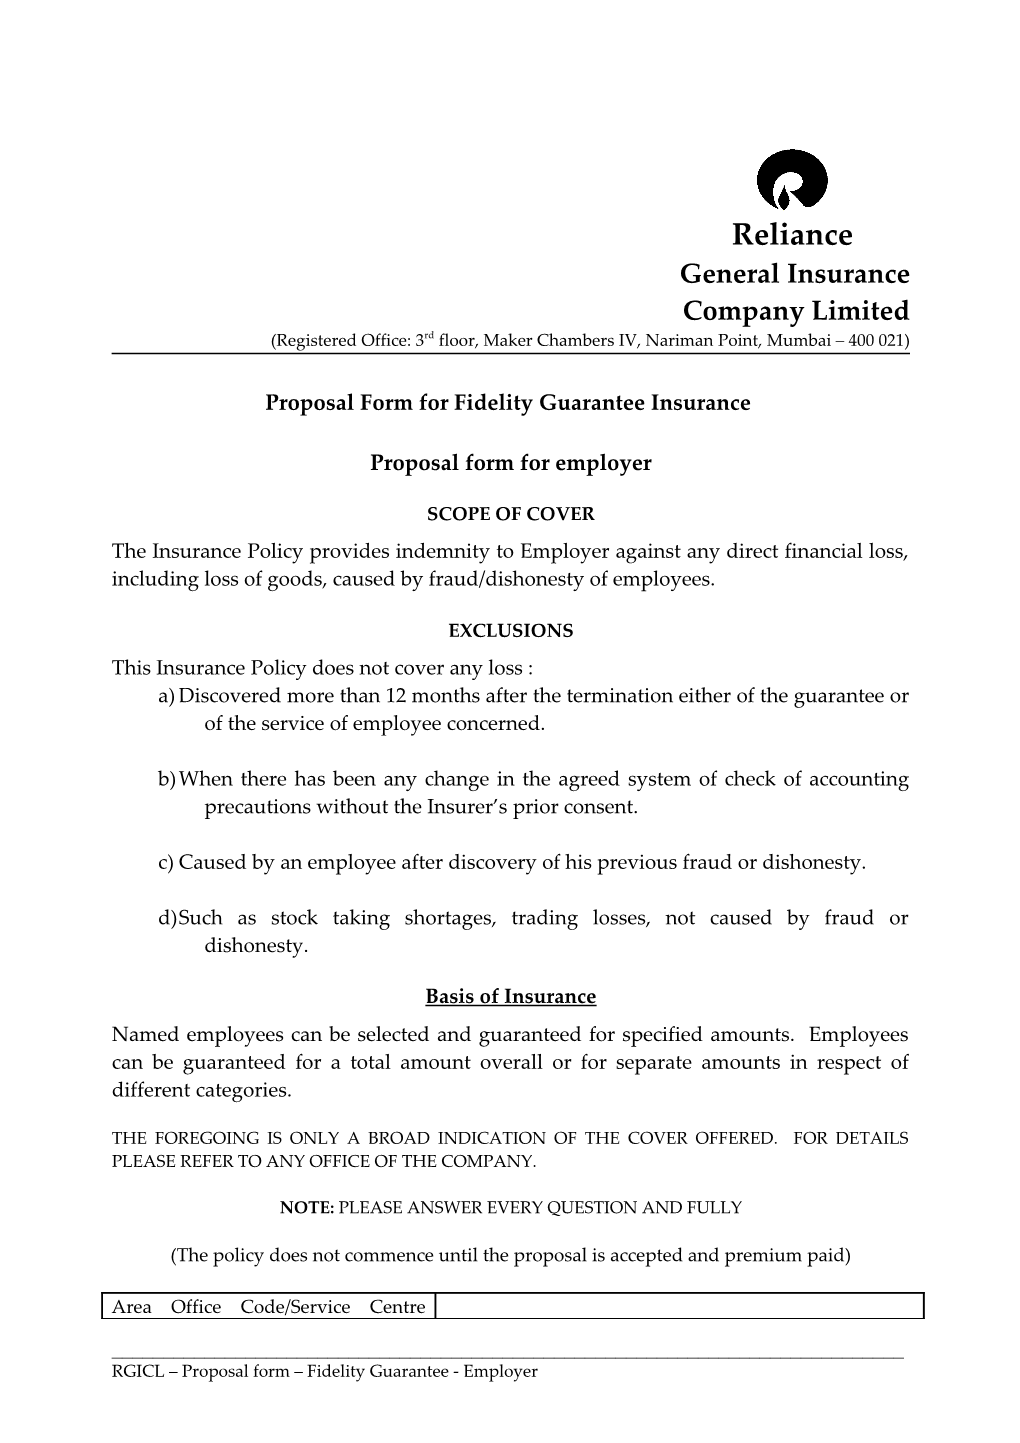 Proposal Form for Fidelity